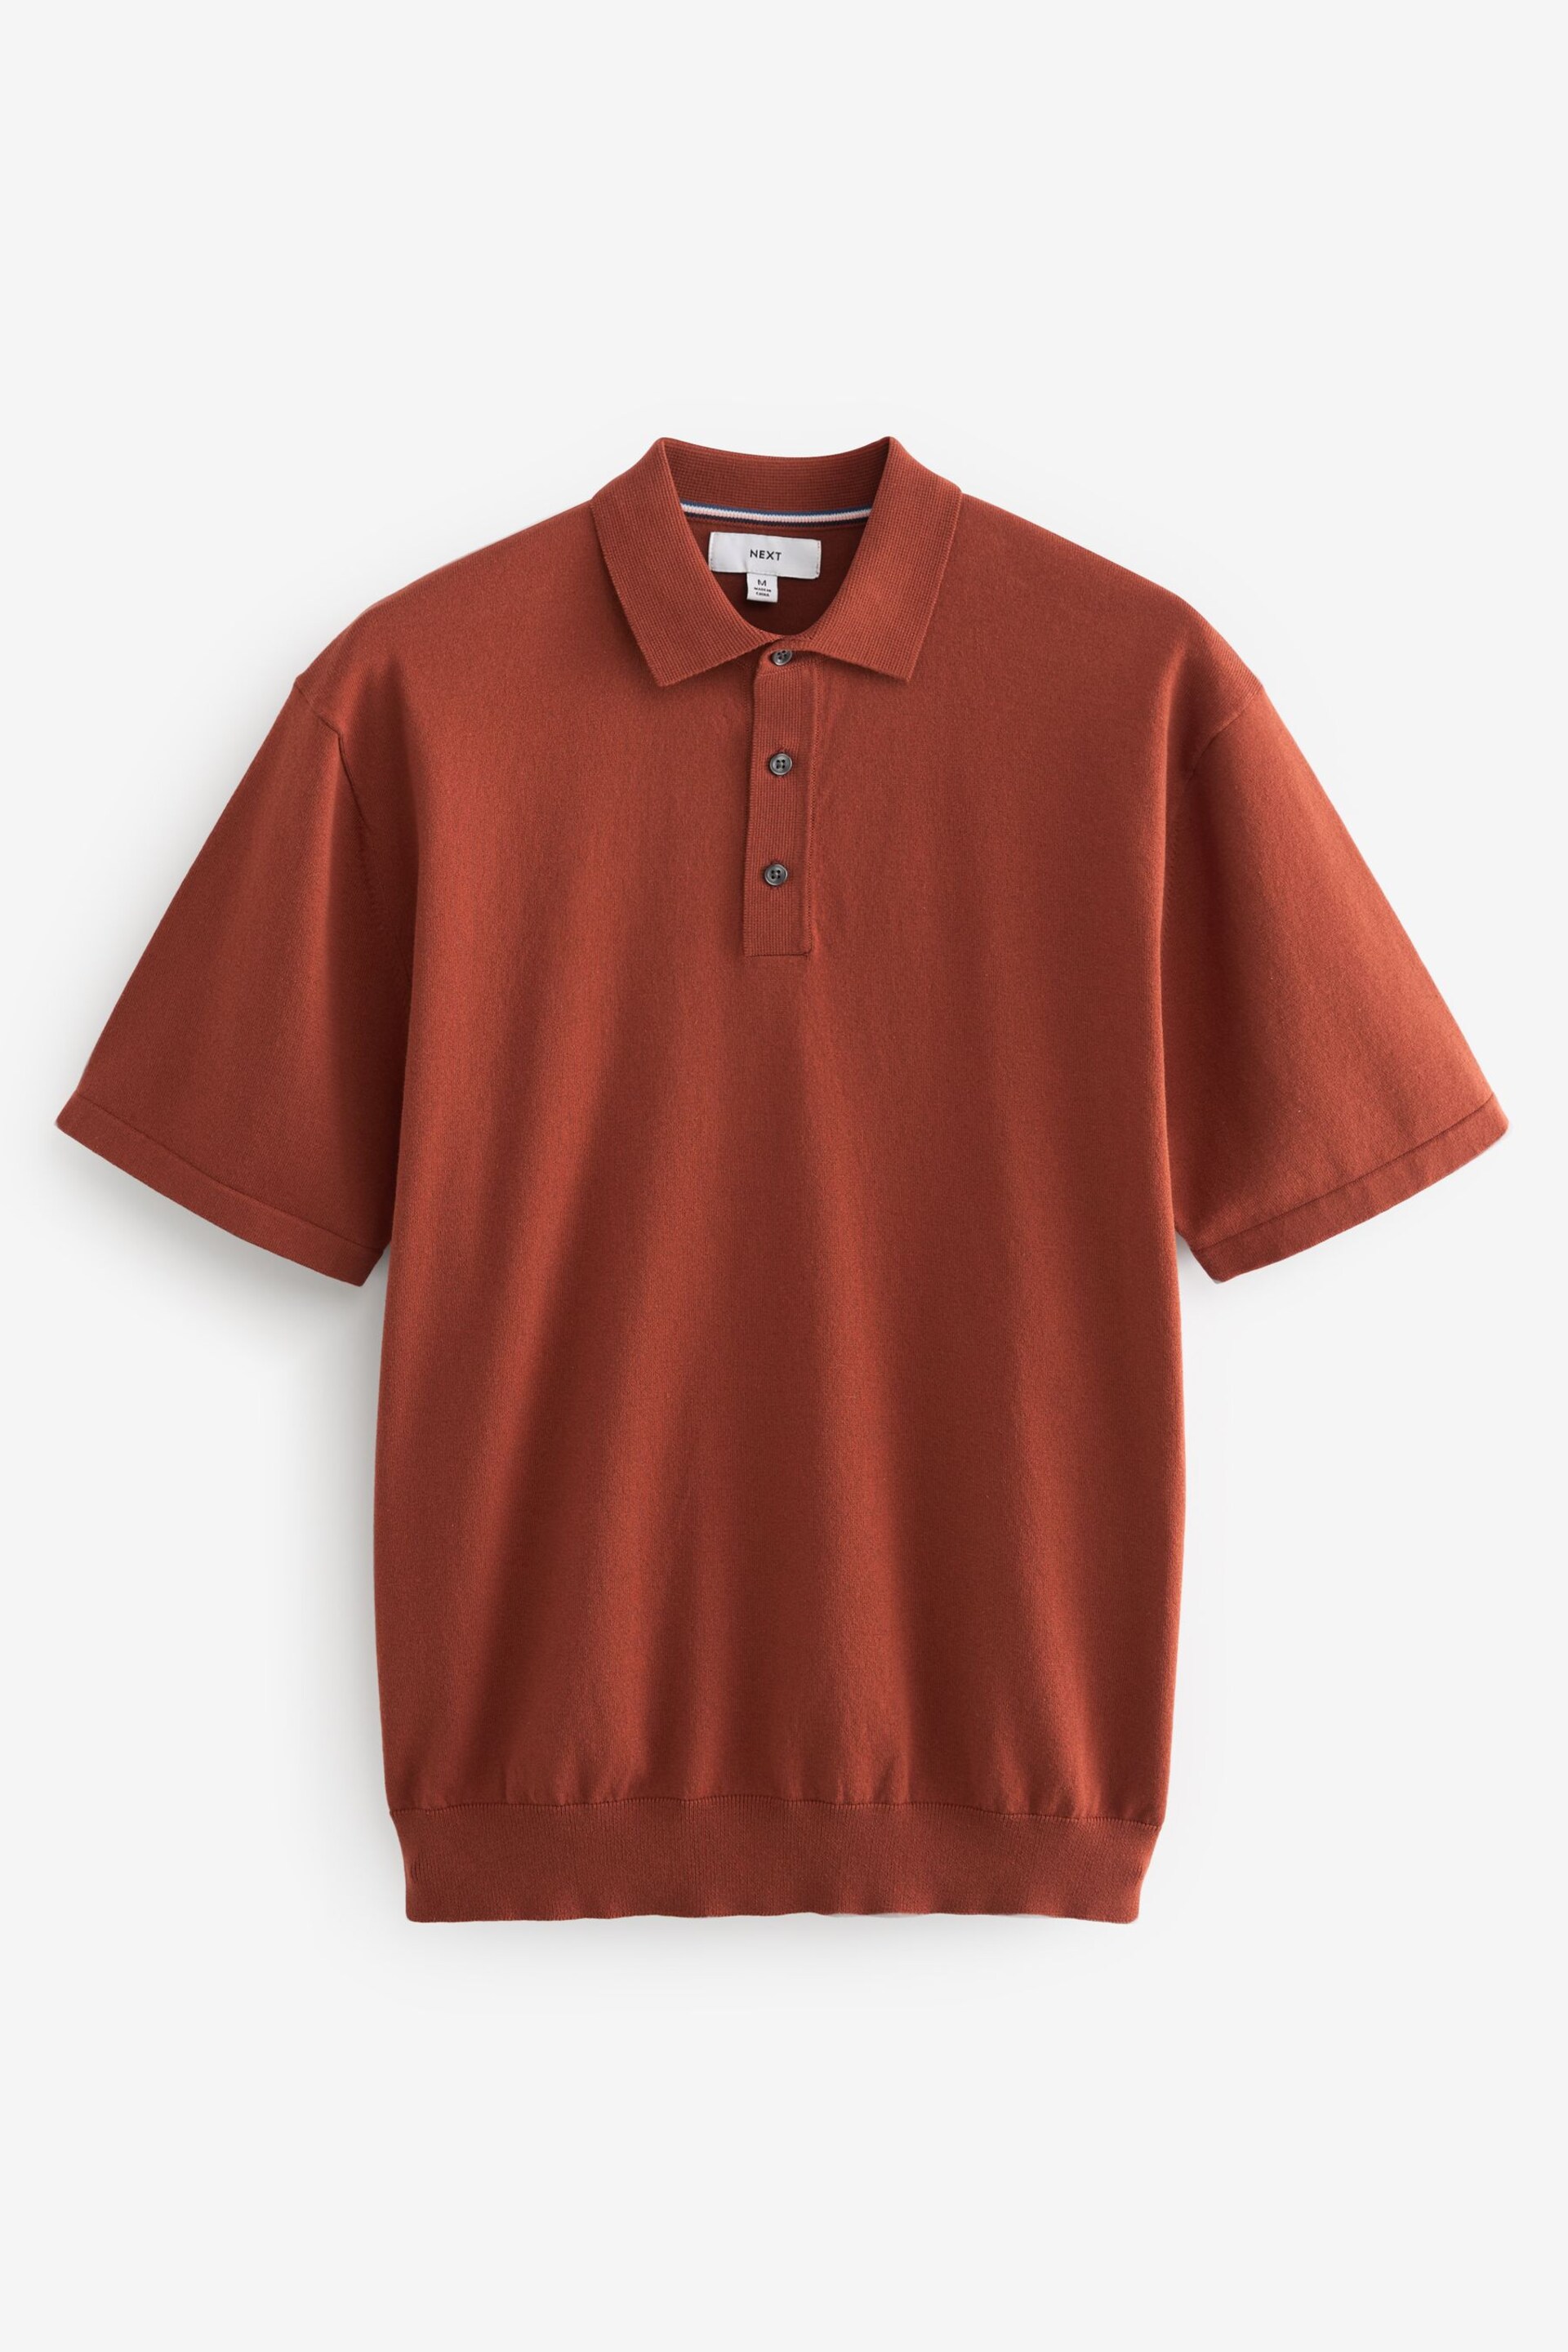 Red Regular Fit Knitted Polo Shirt - Image 5 of 7